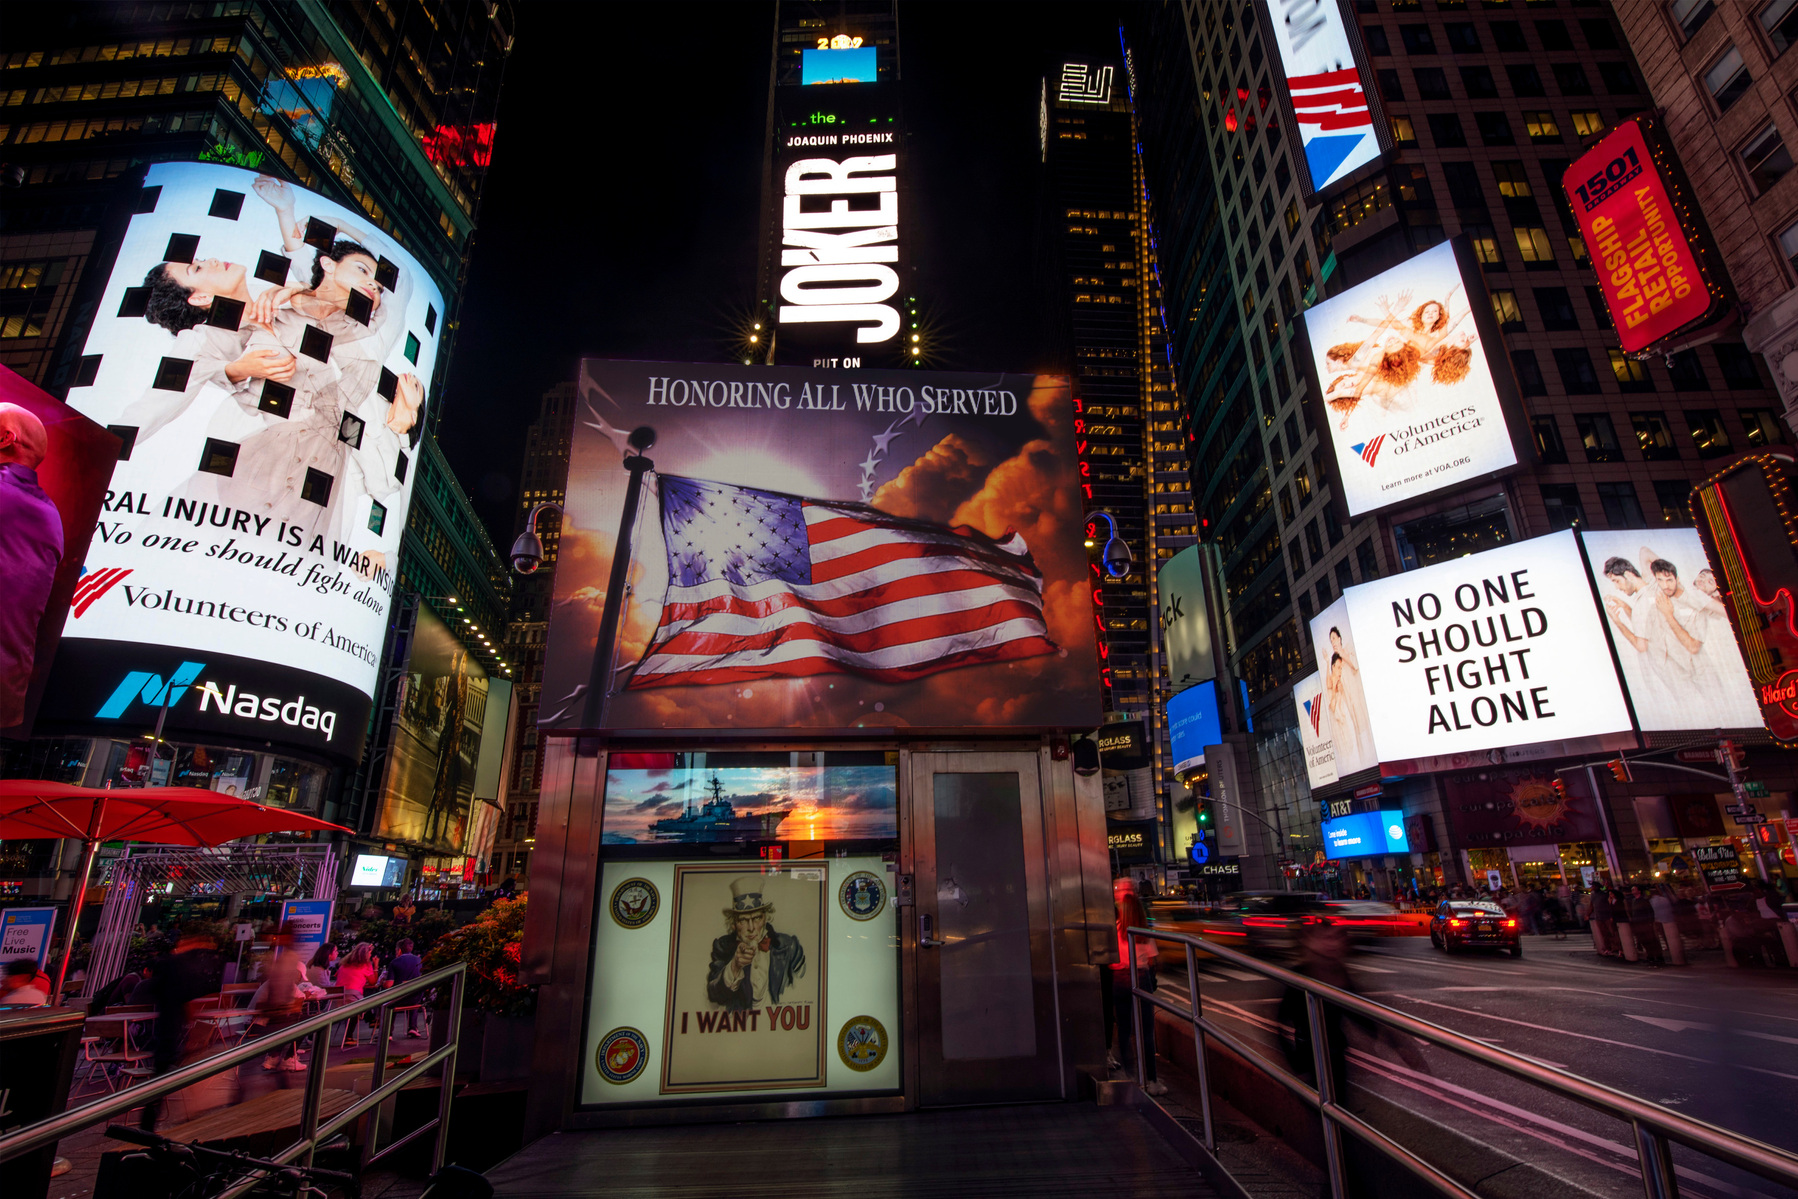 The Volunteers of America campaign photographed by Nir Arieli in Times Square NYC at night